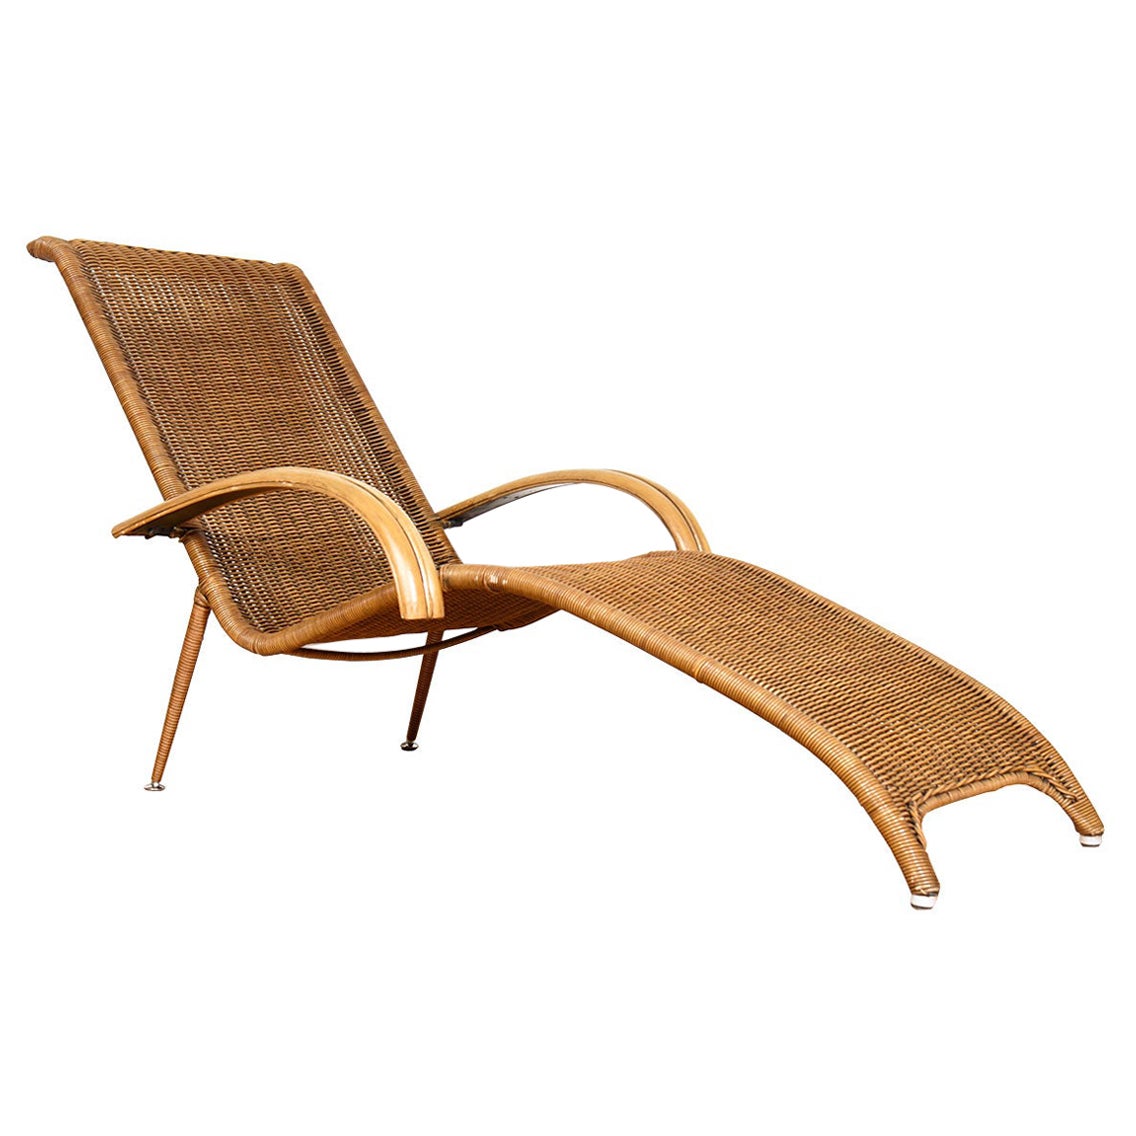 Midcentury Woven Rattan Chaise Lounge